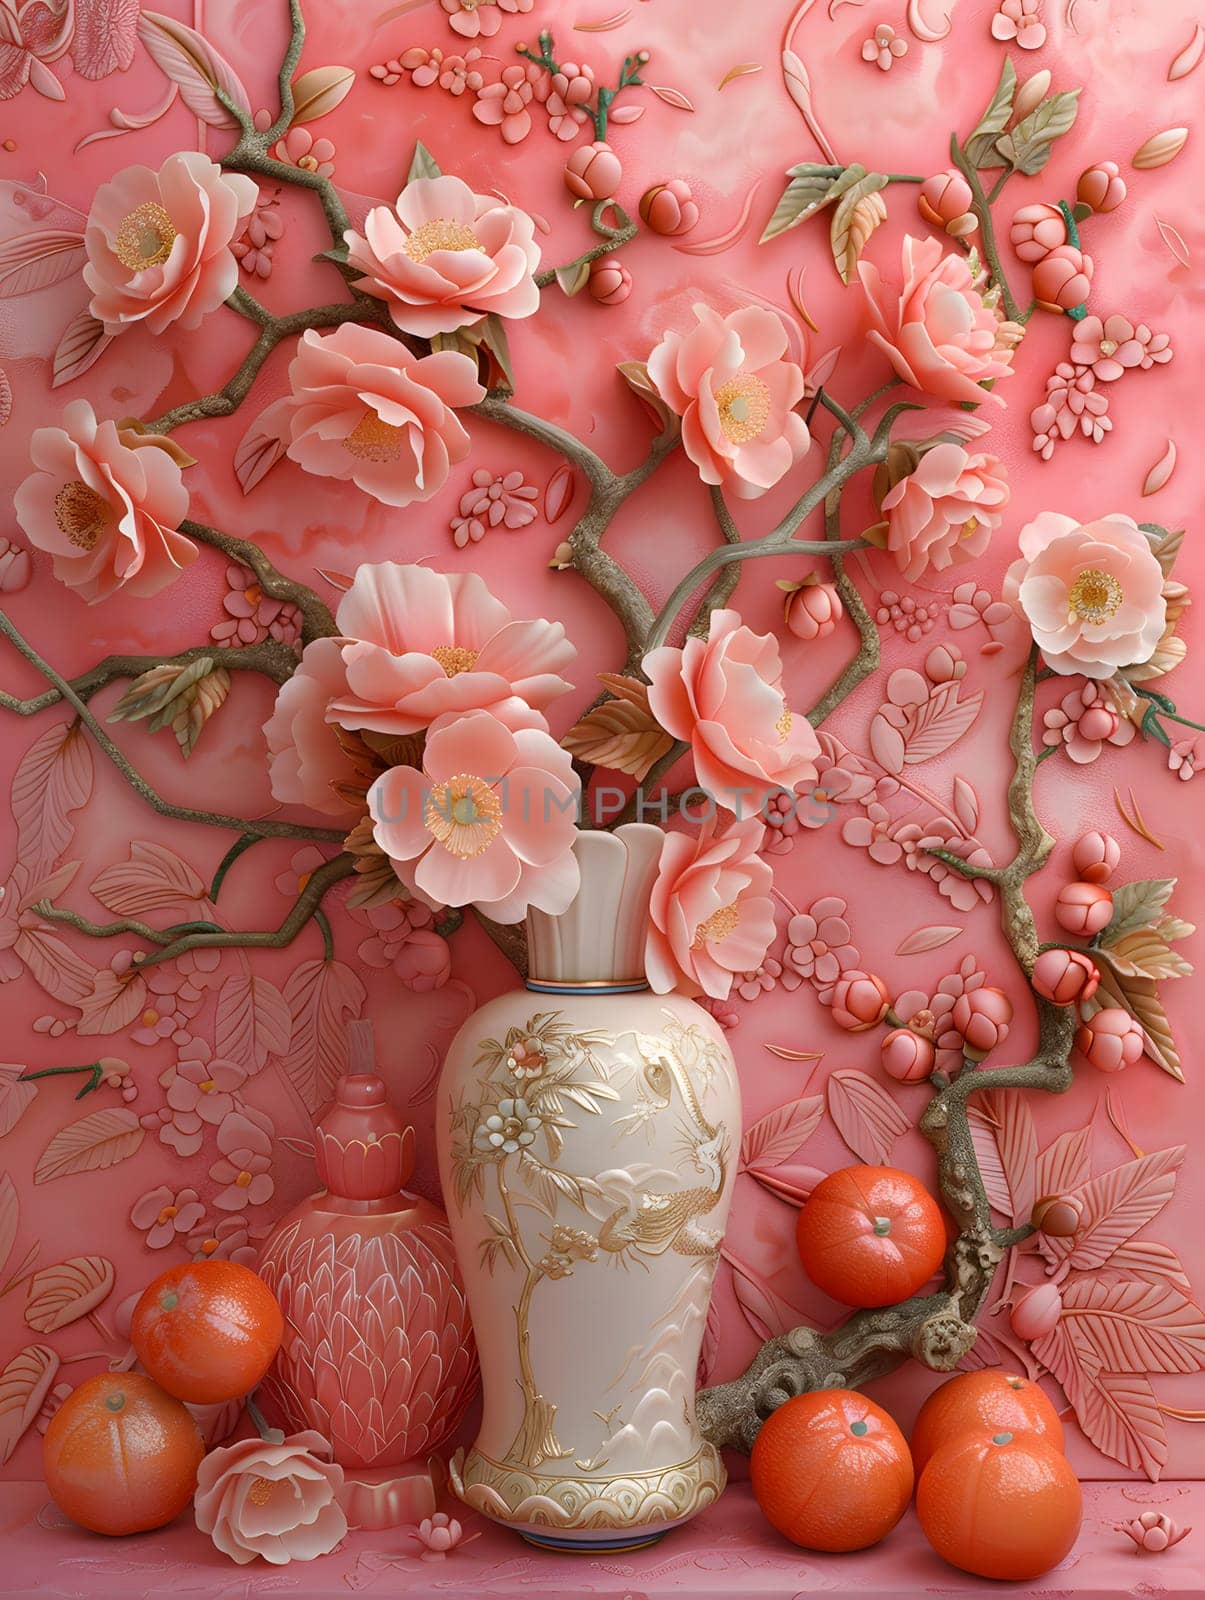 A flowerfilled vase sits atop a pink background, accompanied by bright oranges. The vibrant colors contrast beautifully, creating a lively centerpiece